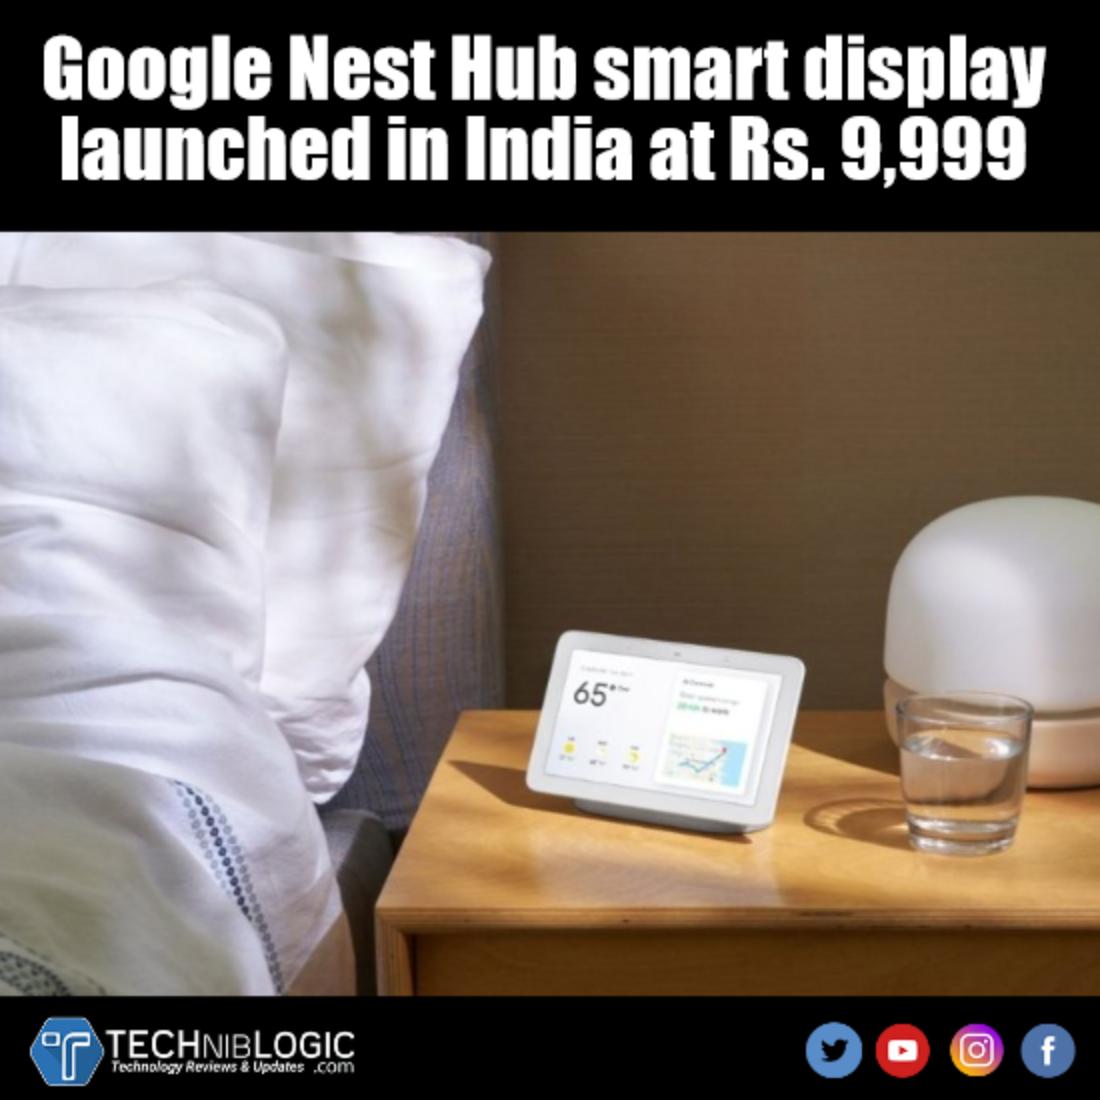 #GoogleNestHub #smartdisplay launched in India at Rs. 9,999